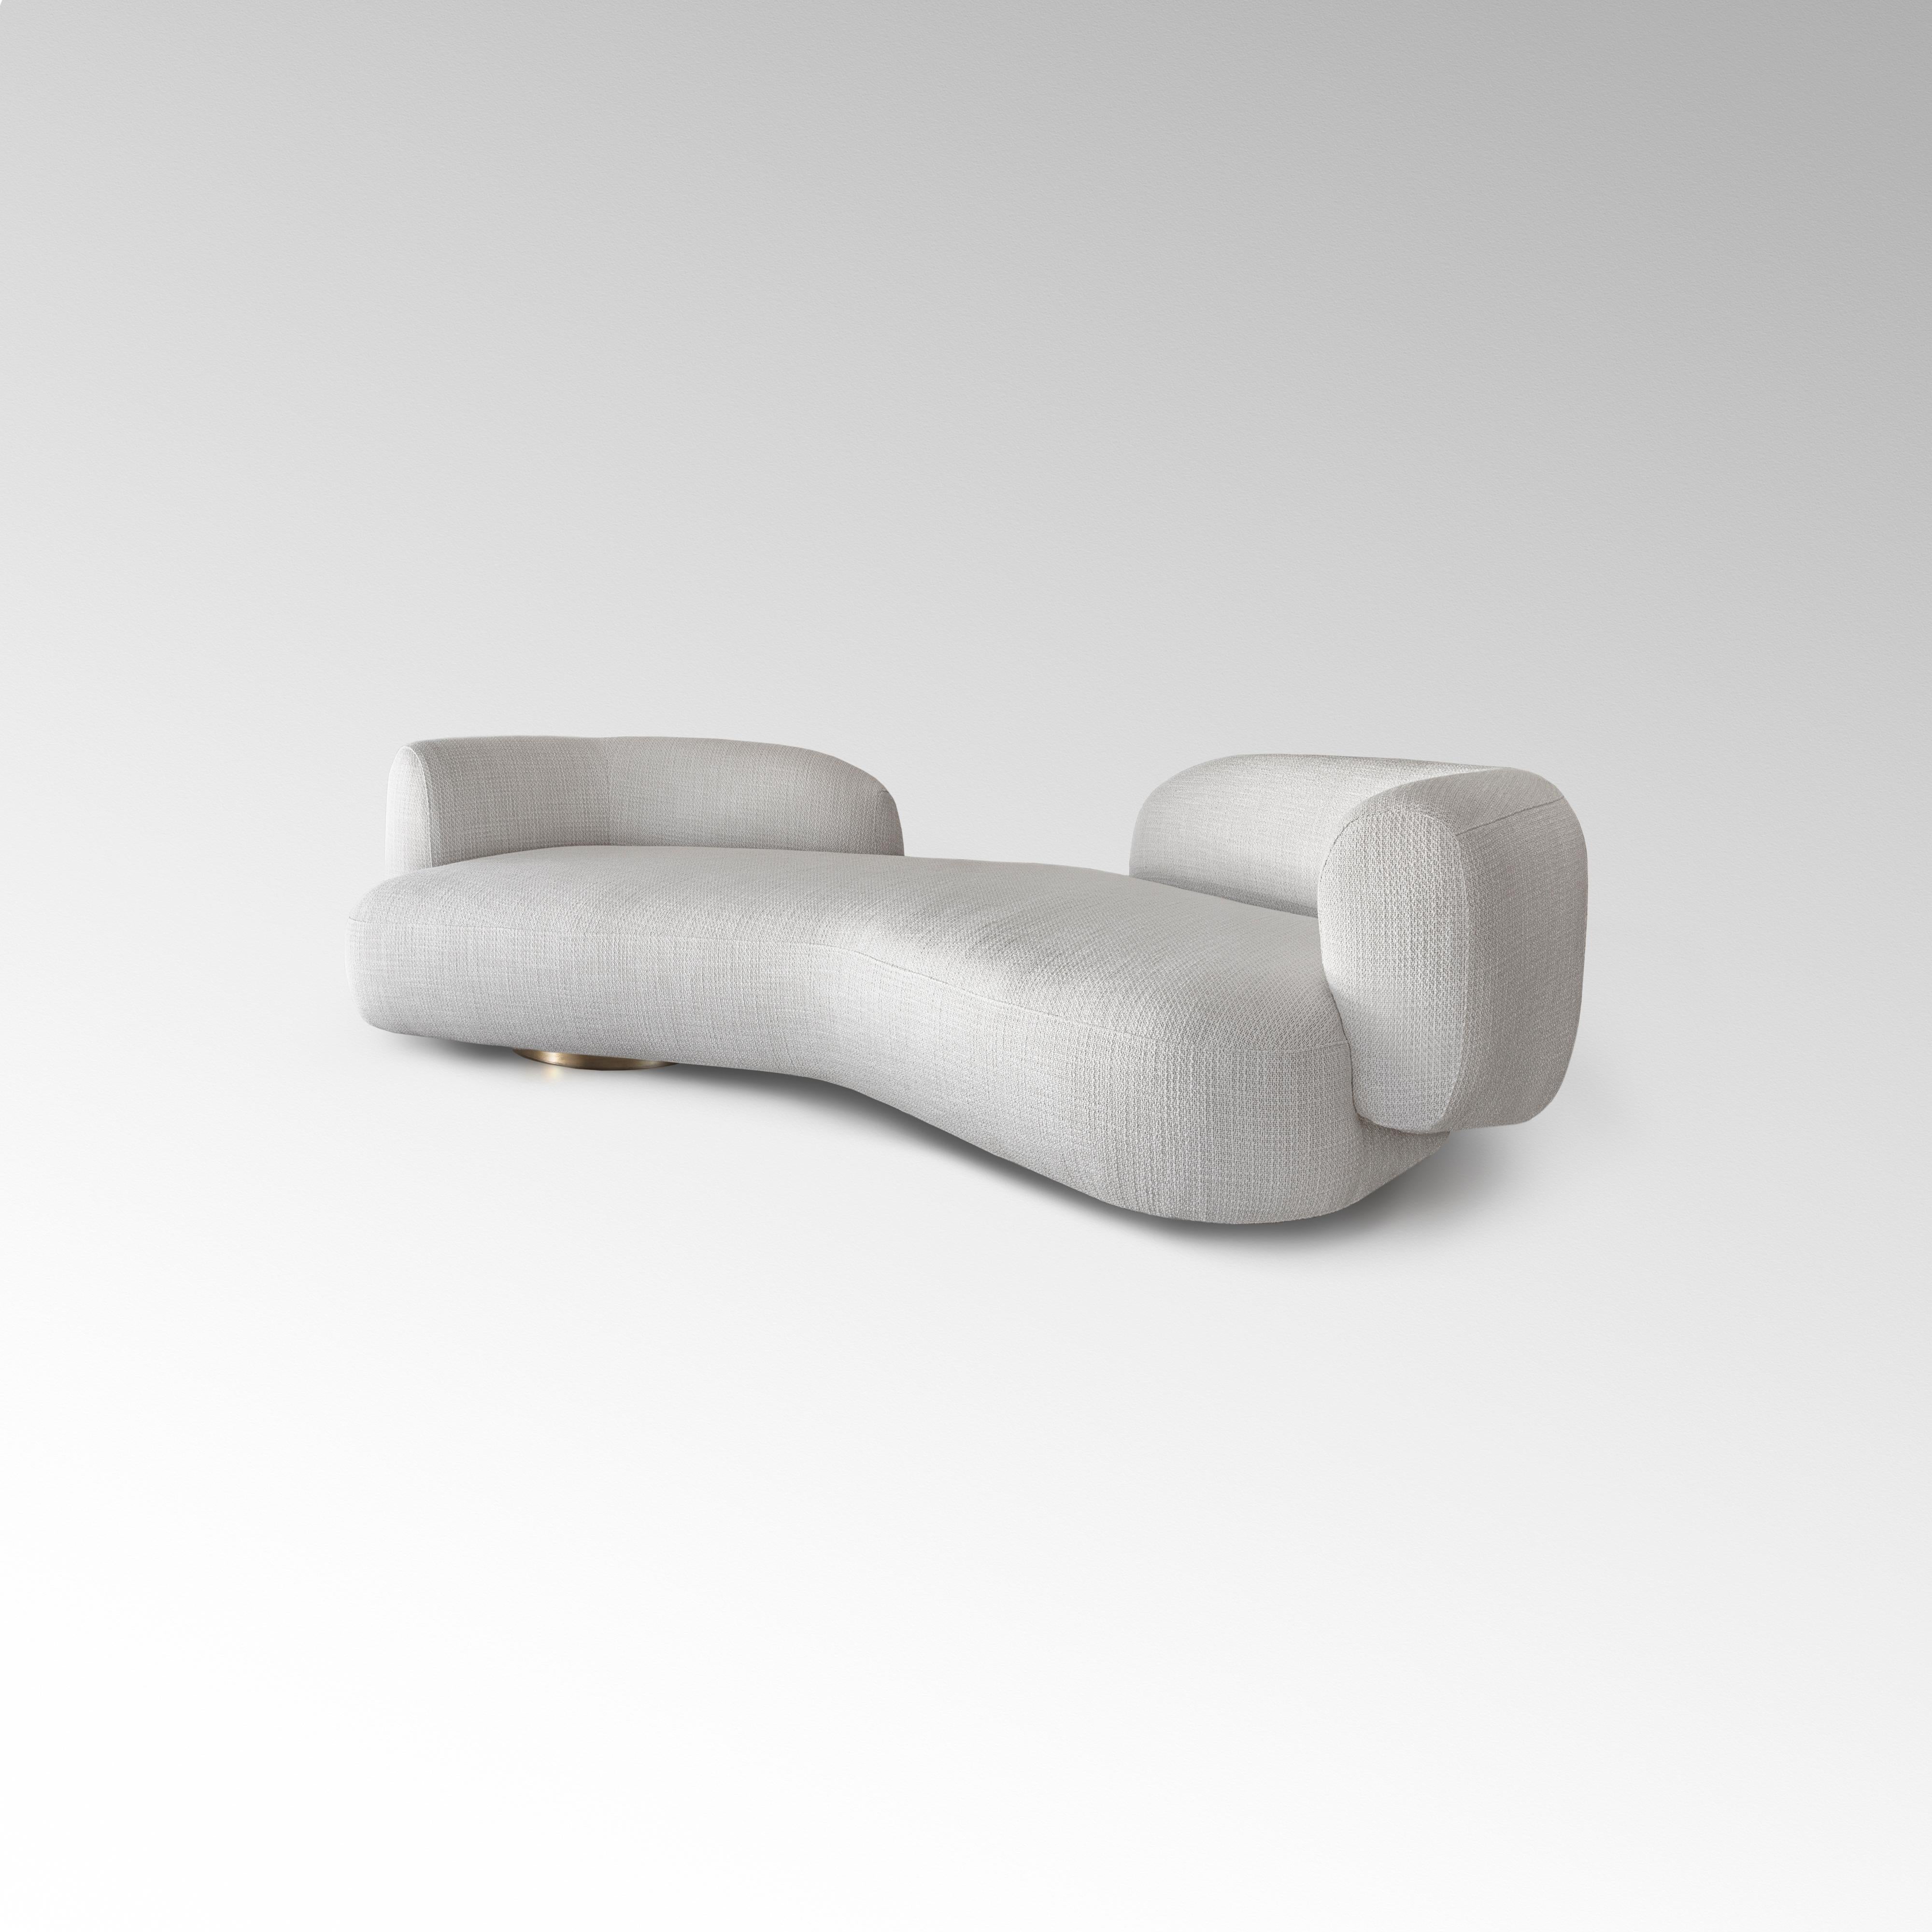 The form is subtly asymmetric, the seat depth varied; the back emerges from a central plateau and spans out from a vacant space curving gracefully to create elegantly banking arms and backrests both left and right. Viewed from all angles, REVERB